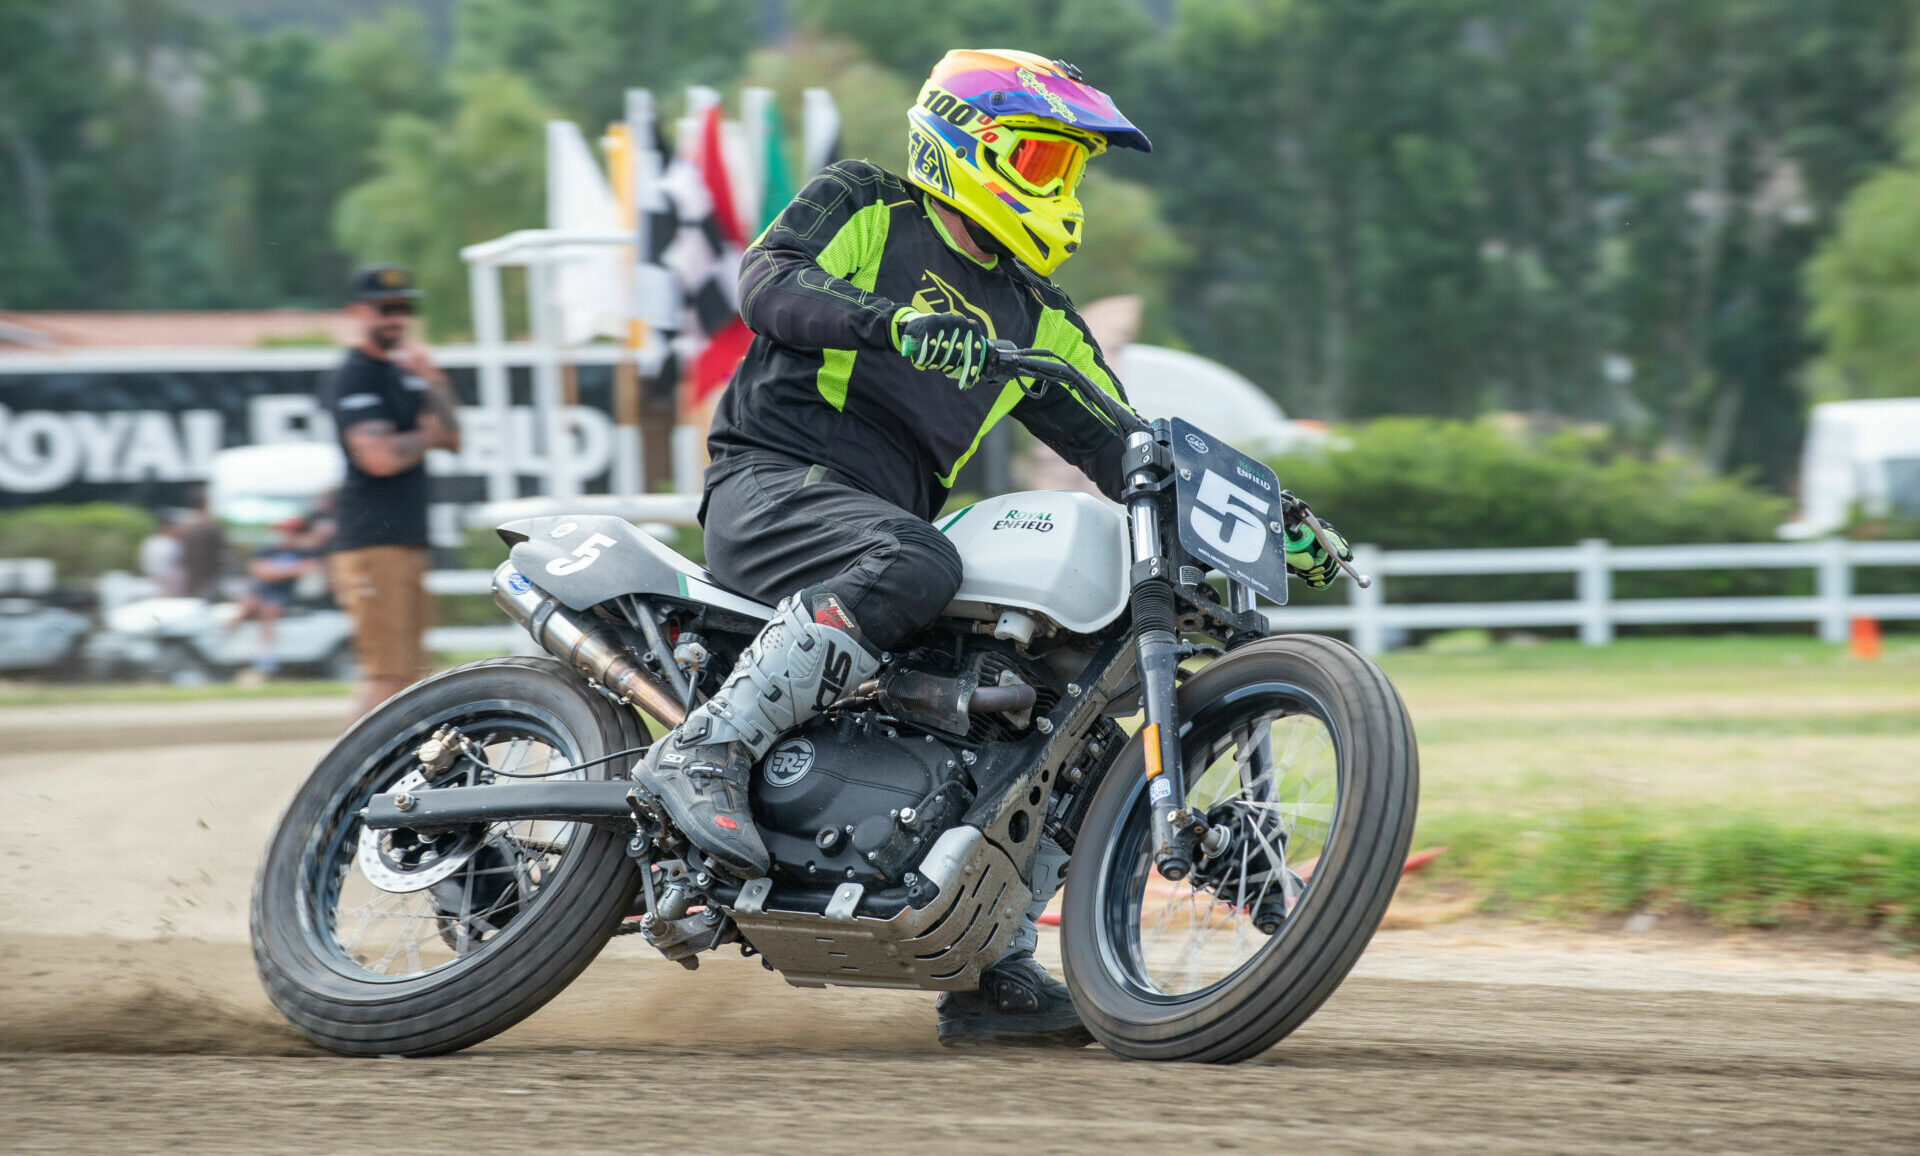 A student in action at a Royal Enfield Slide School by Moto Anatomy. Photo courtesy Royal Enfield North America.